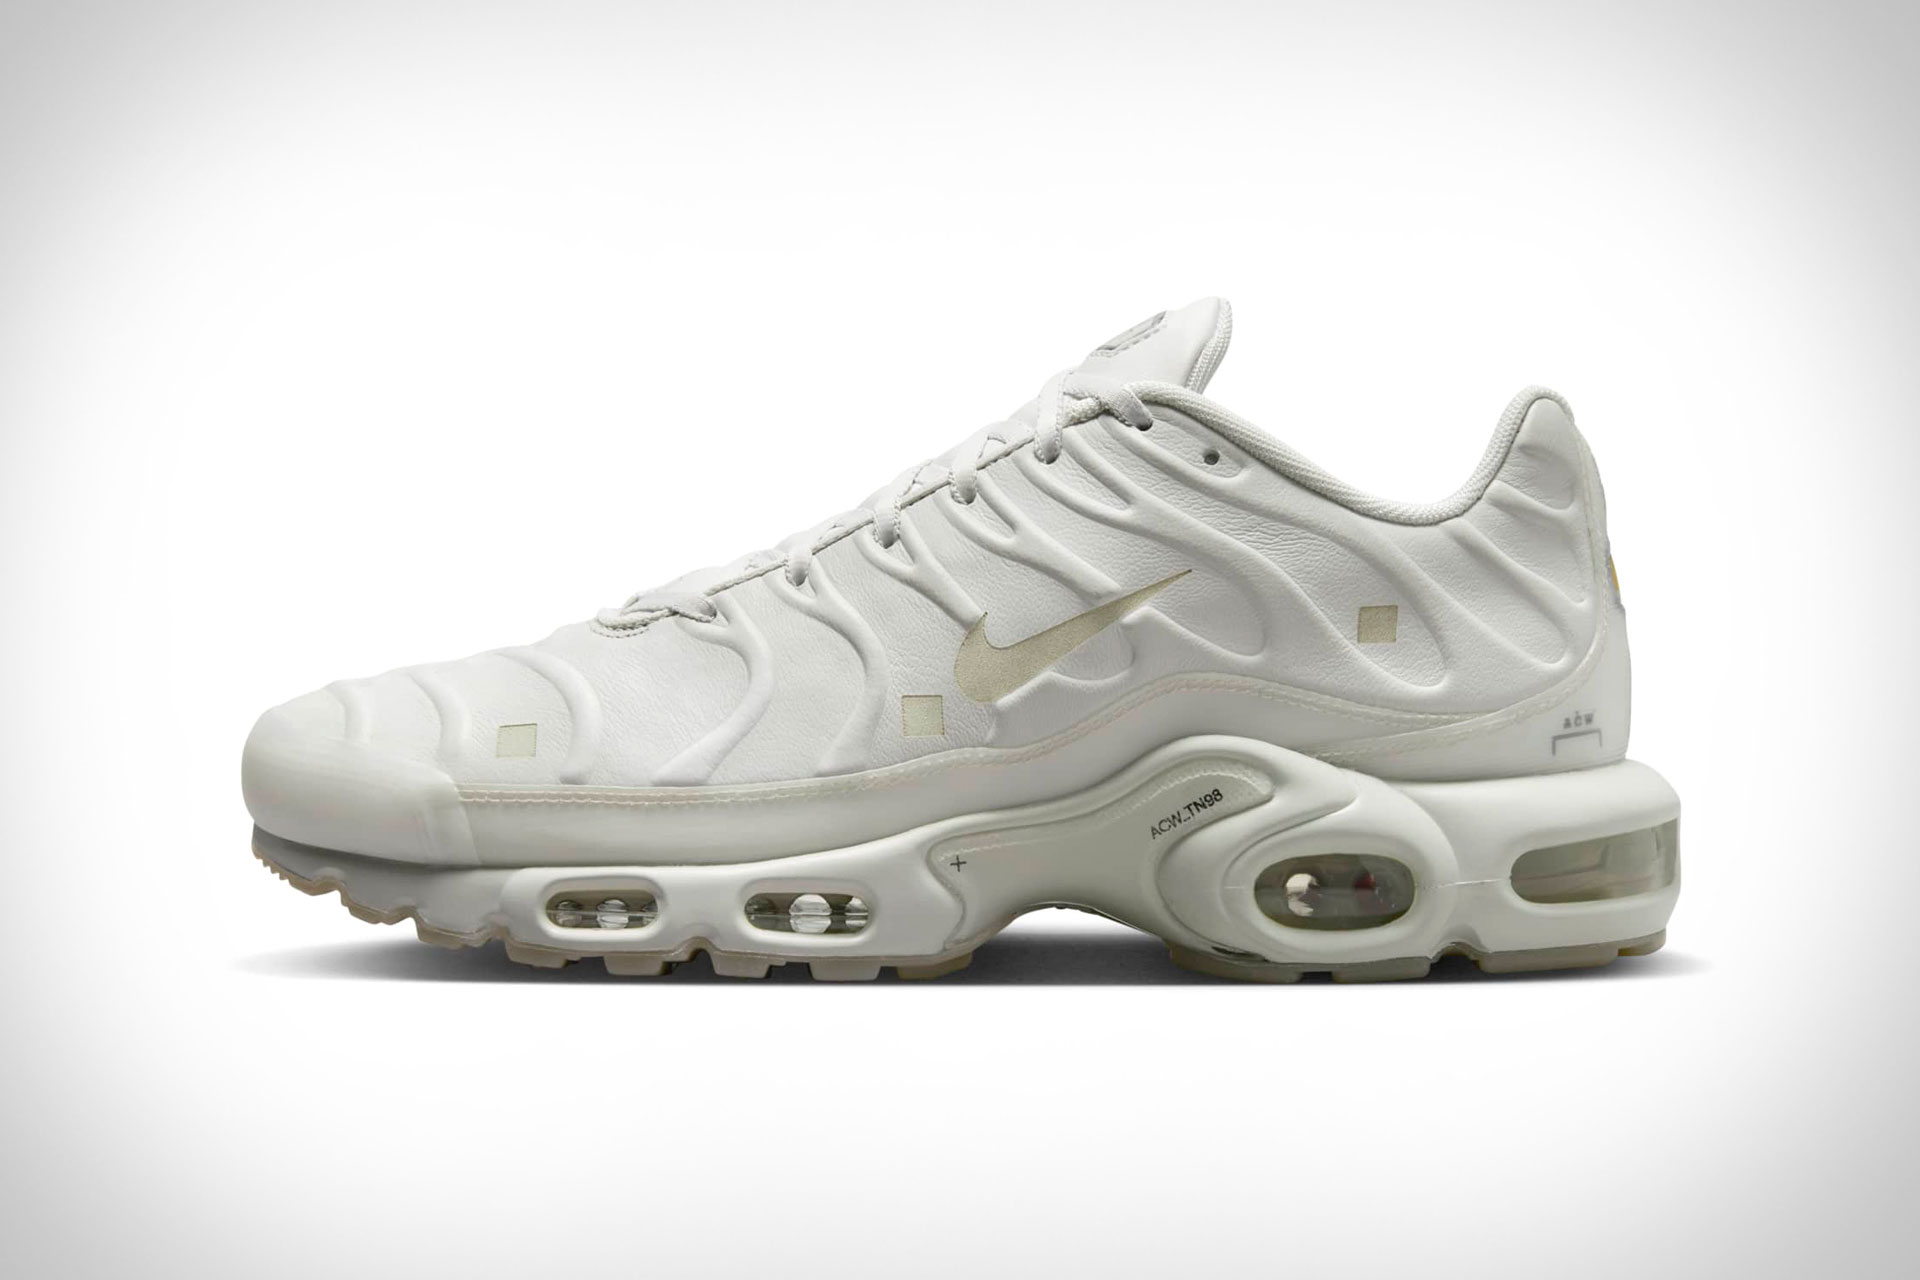 Nike x A-Cold-Wall* Air Max Plus Sneakers, #Nike #AColdWall #Air #Max #Sneakers